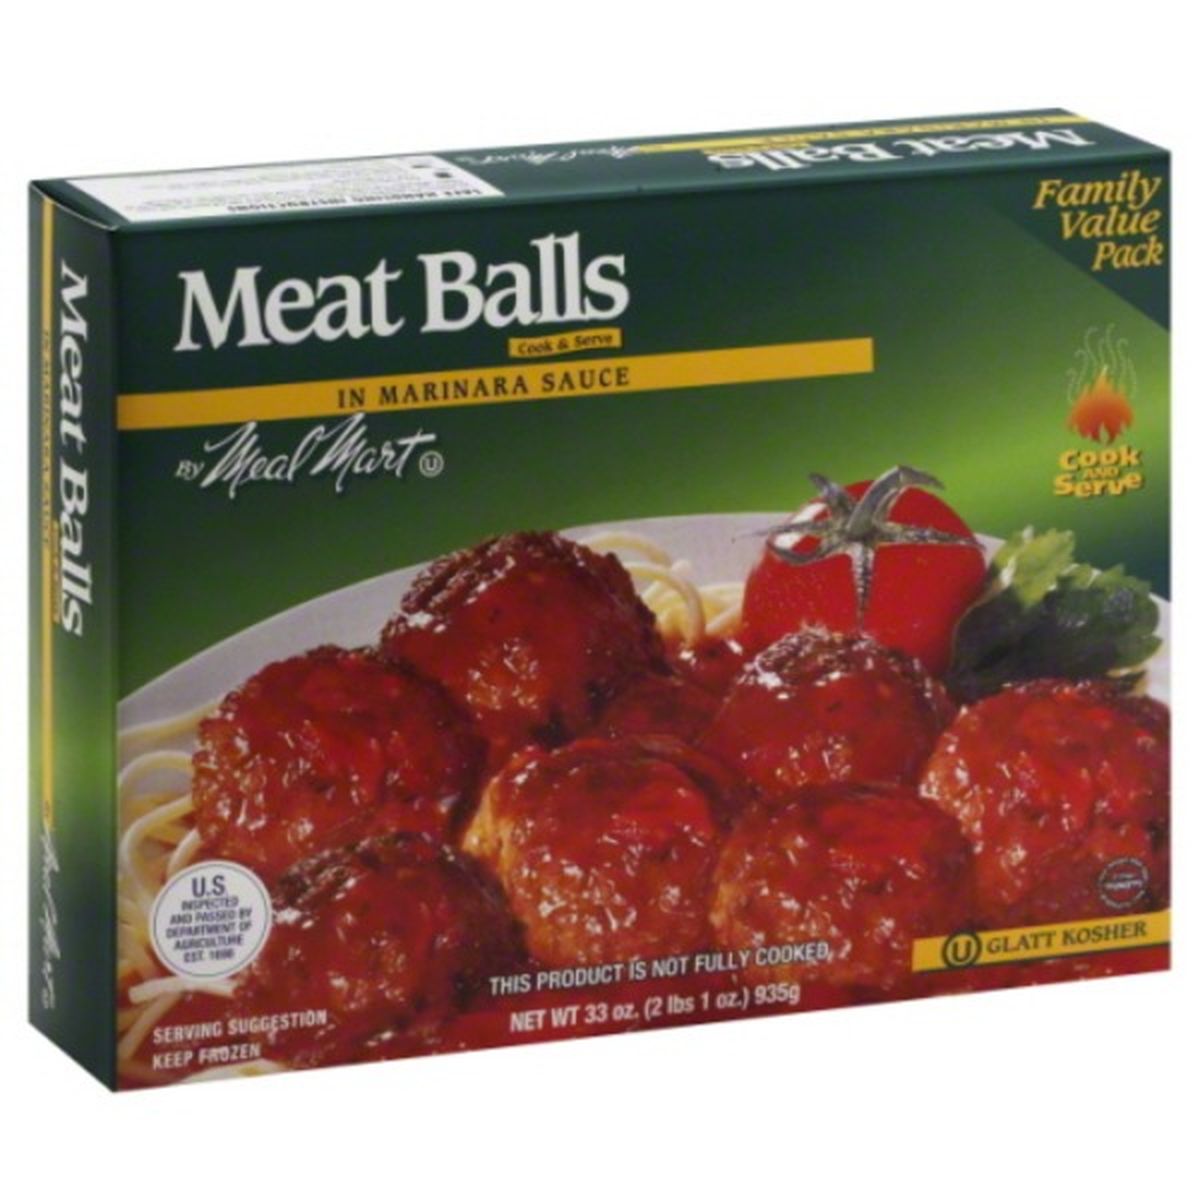 Calories in Meal Mar Meat Balls, in Marinara Sauce, Family Value Pack